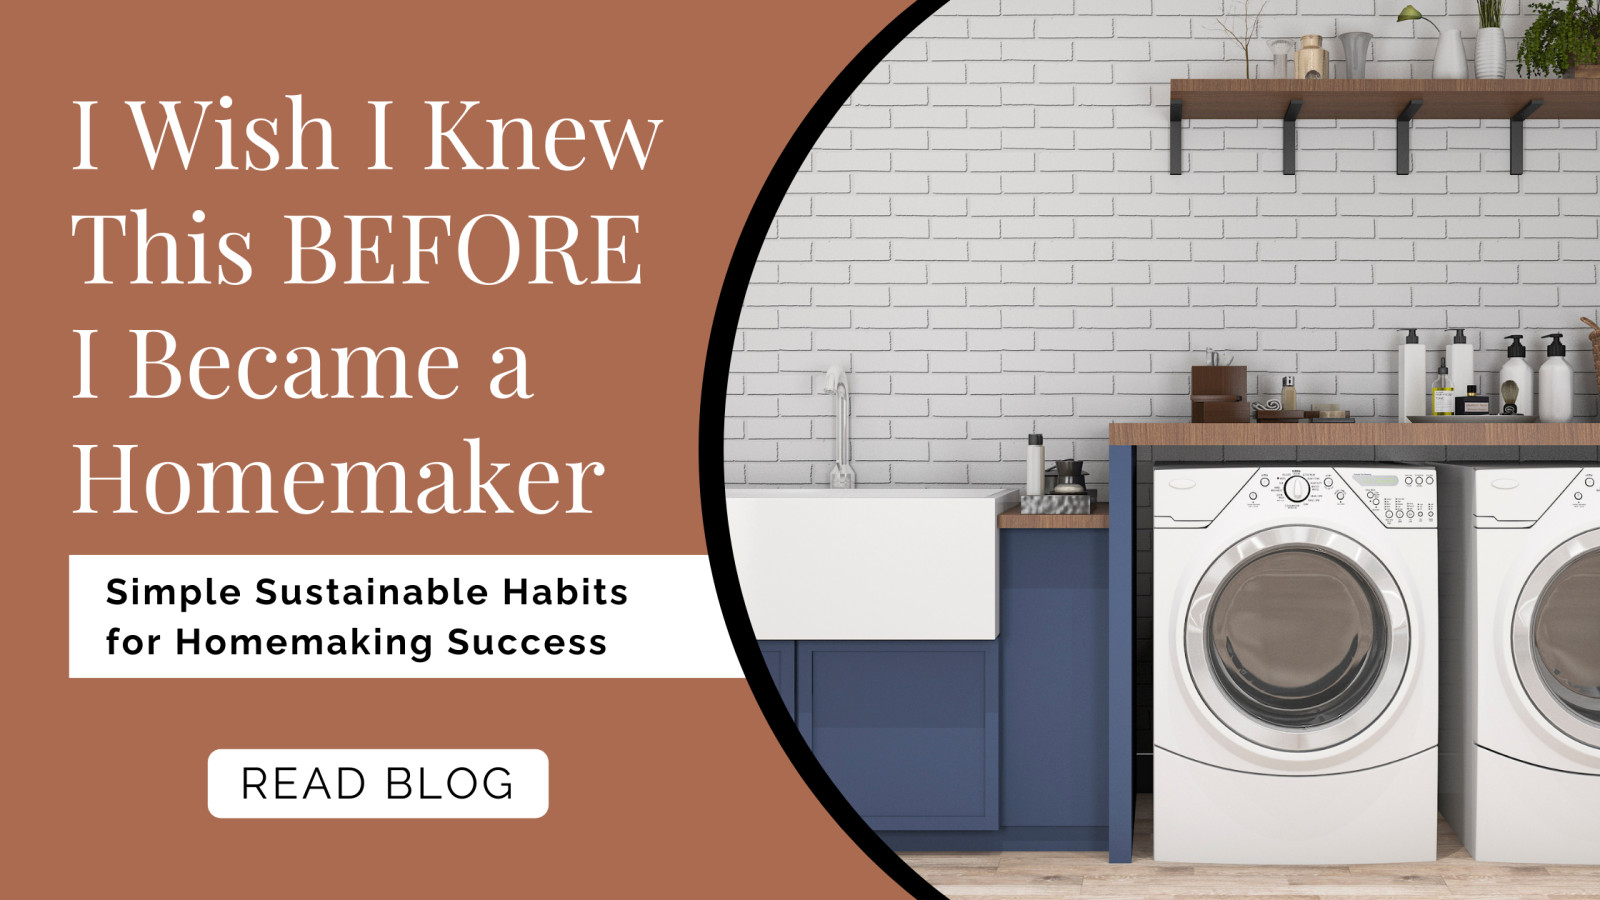 I Wish I Knew This Before I Became a Homemaker